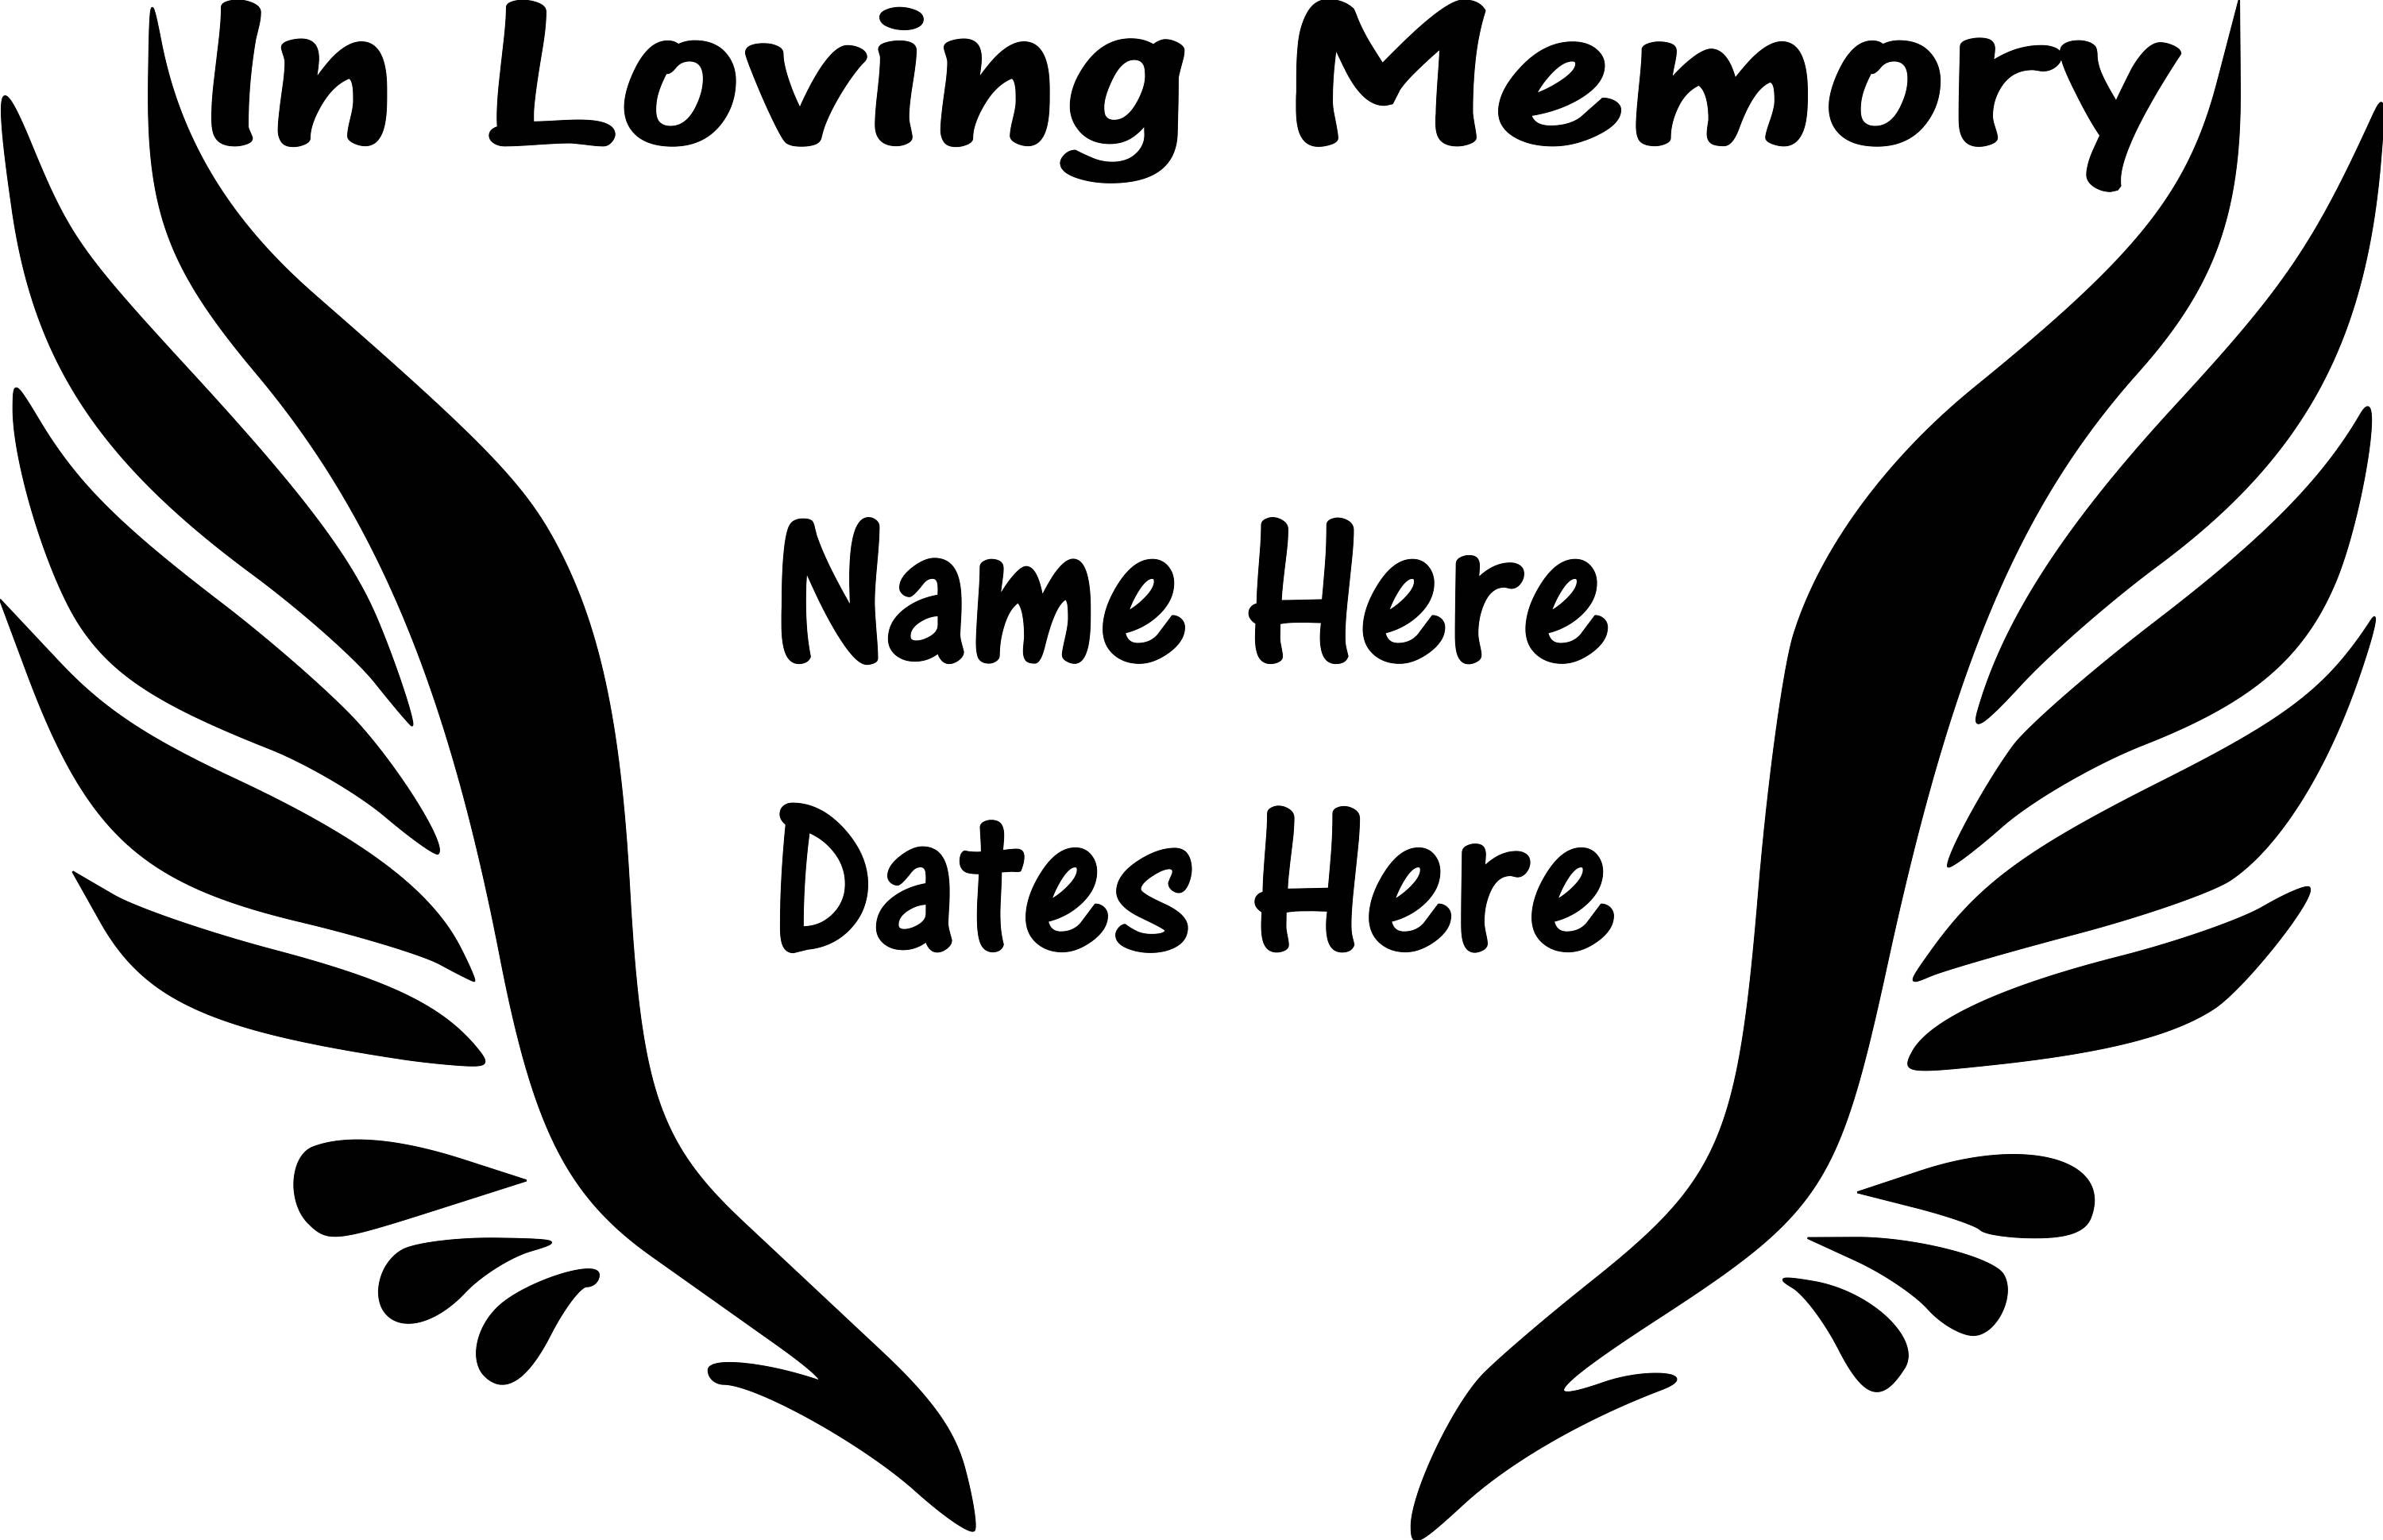 in-loving-memory-vinyl-decal-sticker-graphic-personalized-etsy